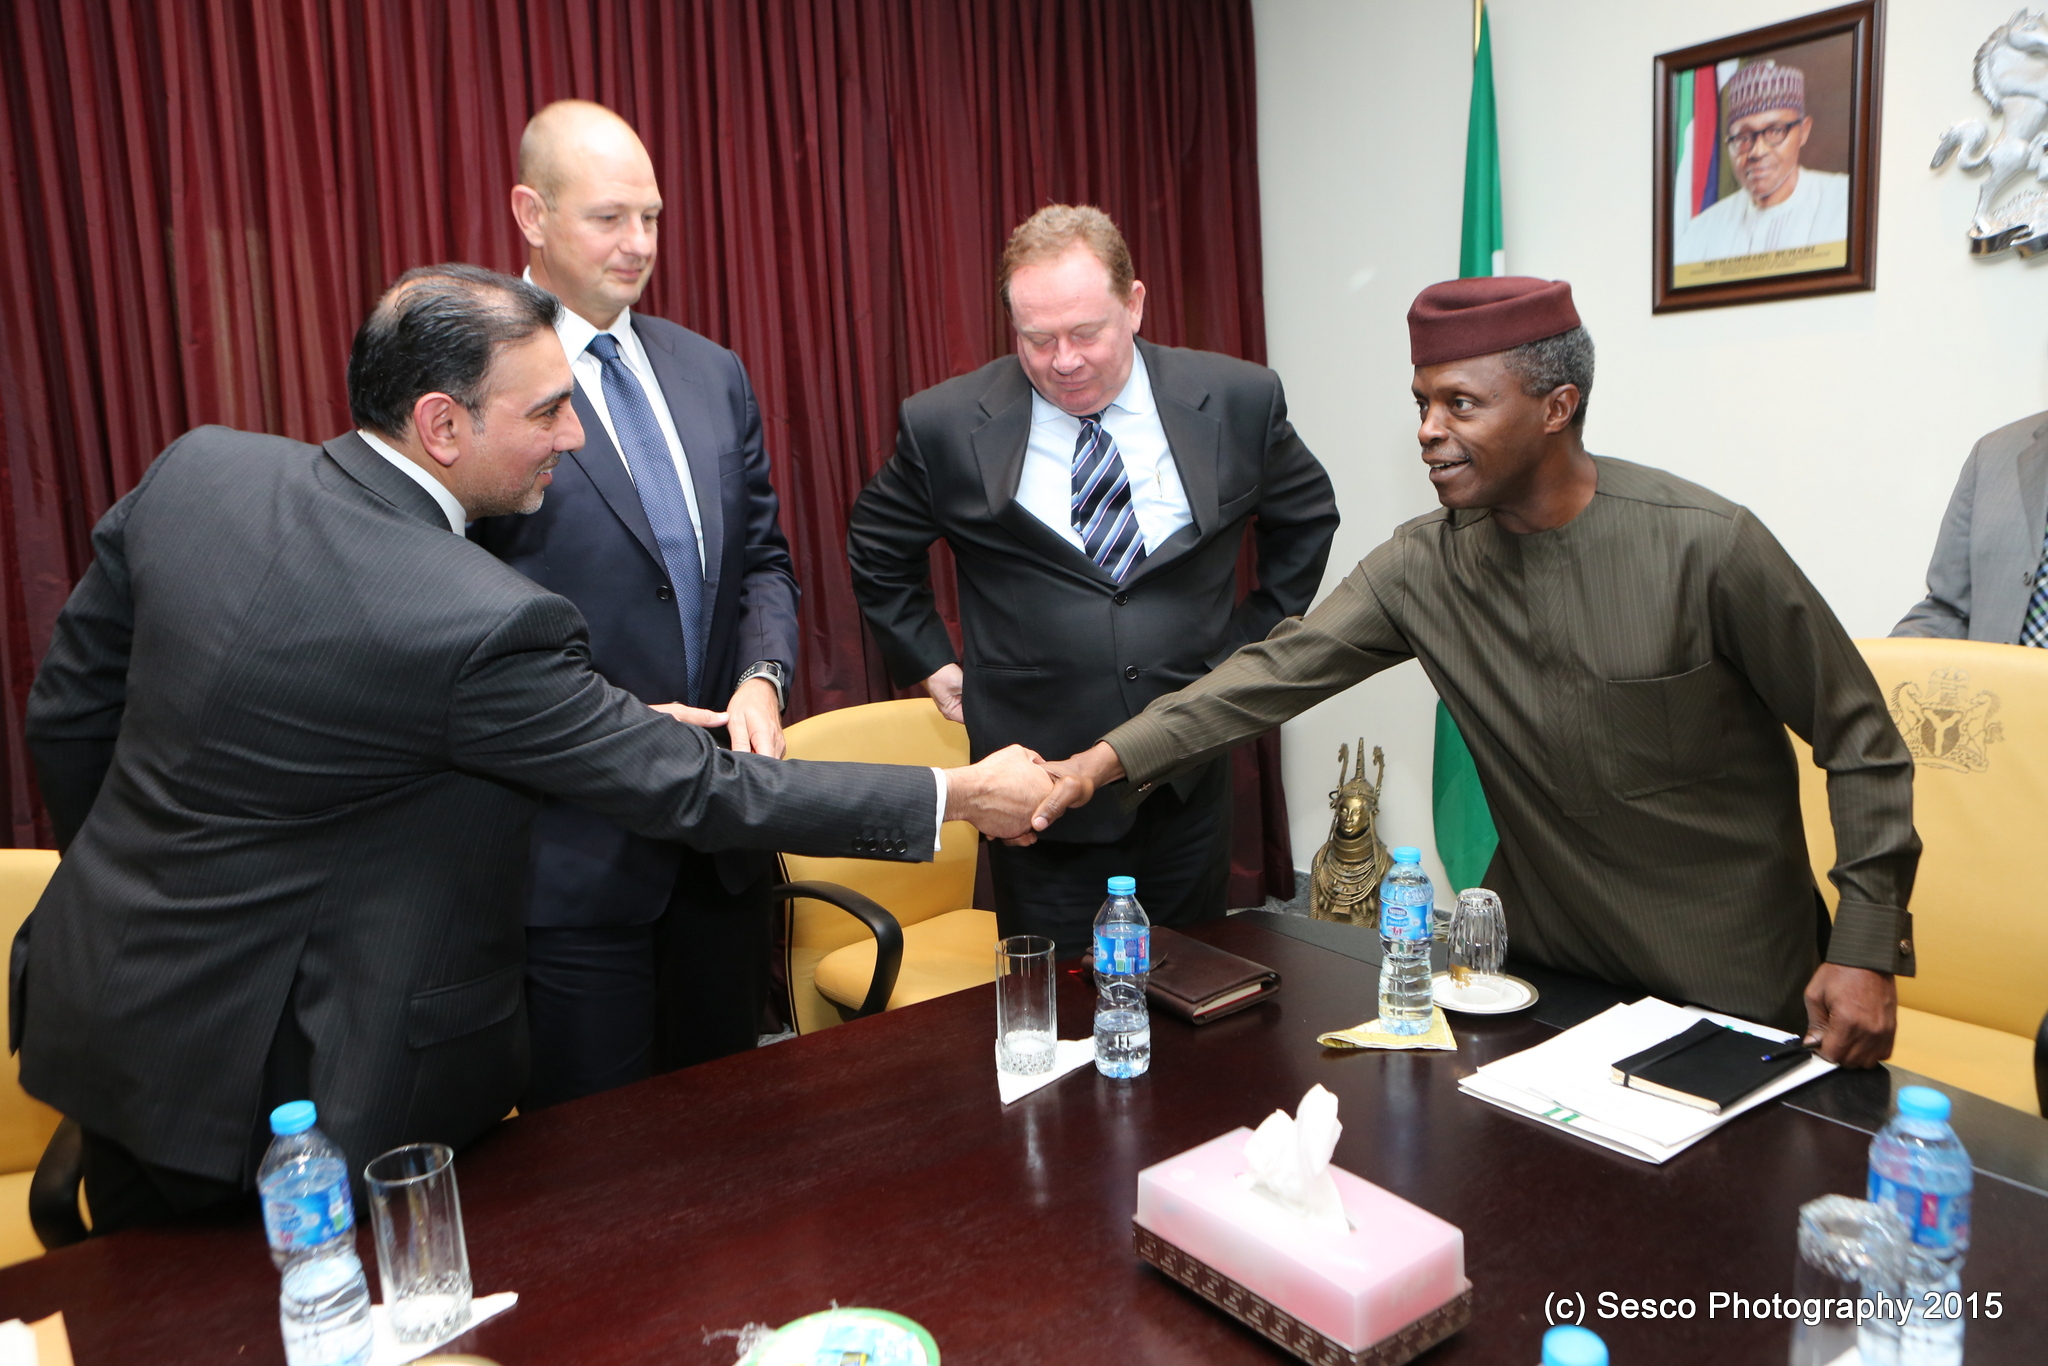 VP Osinbajo Meets With Management Of Medtronic On 05/08/2015